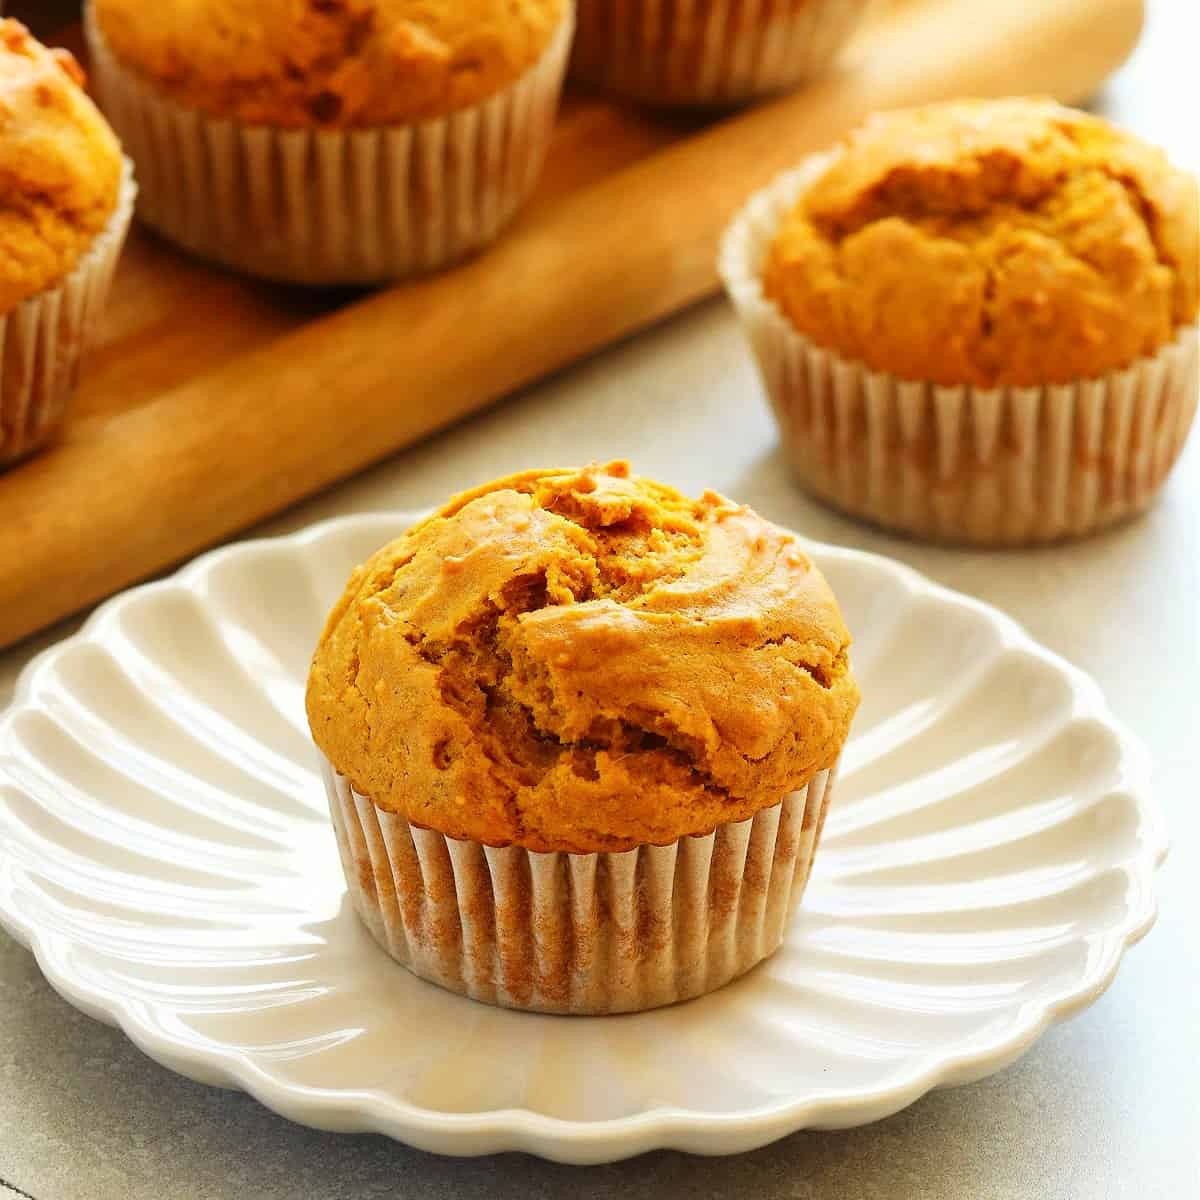 Square photo of a pumpkin muffin on a petal plate with more muffins in the background.